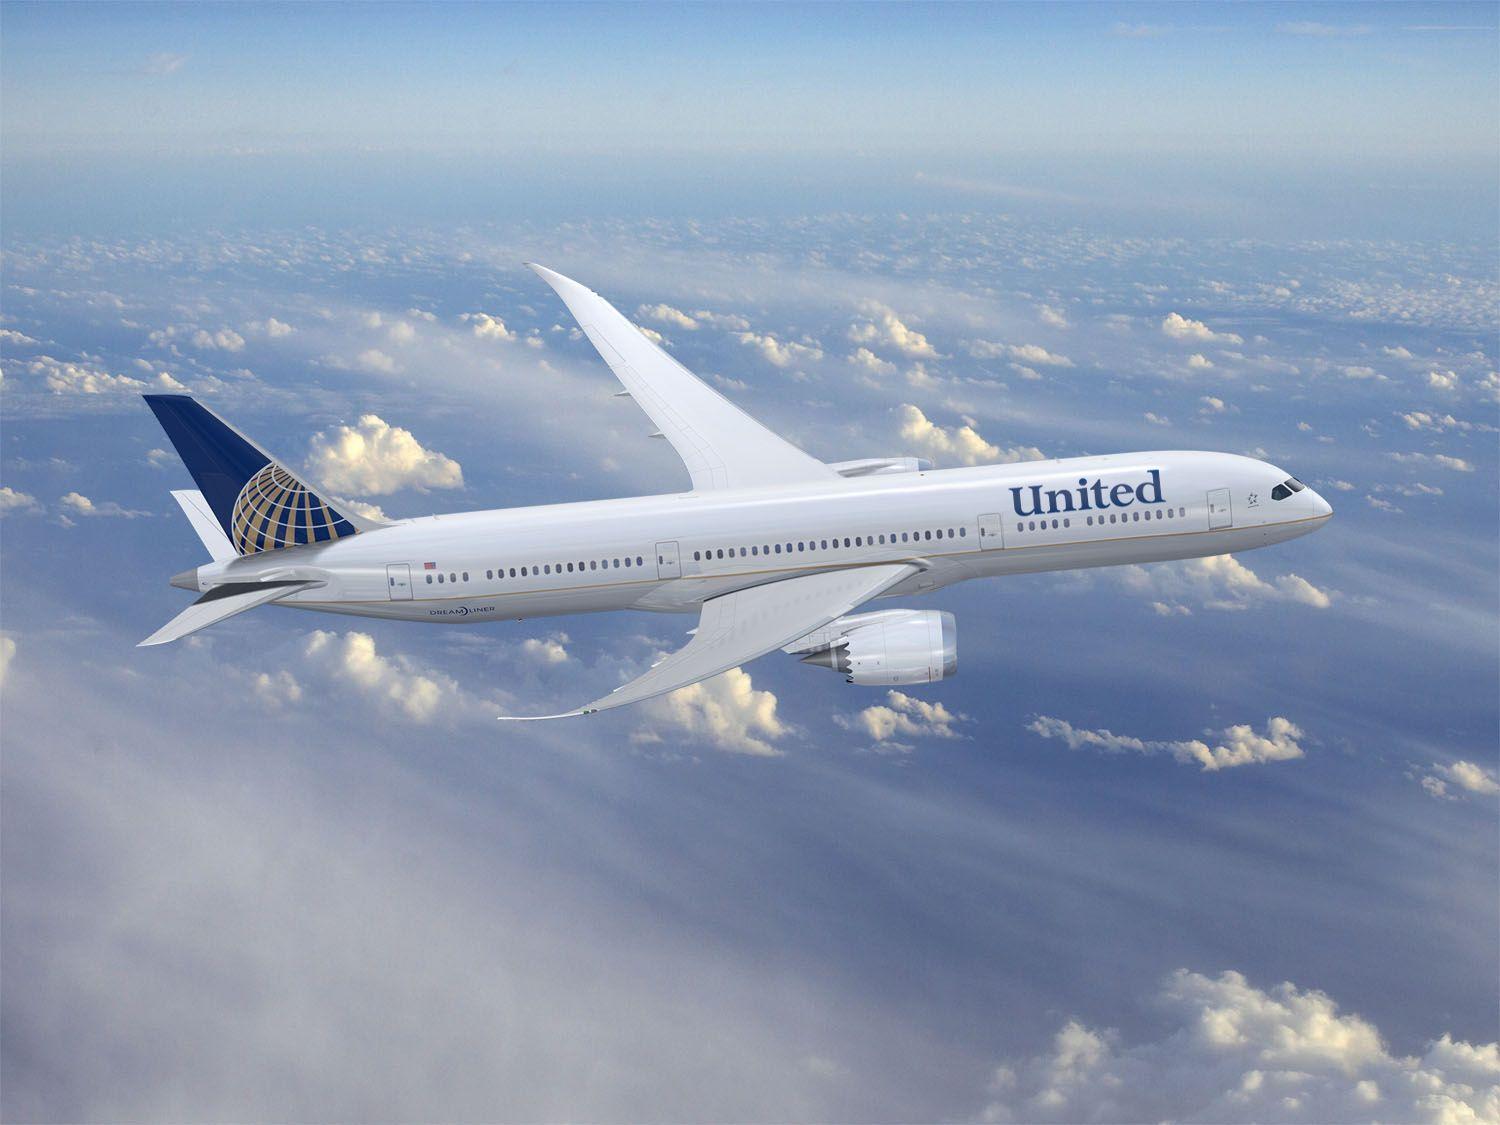 New United Continental Logo - The Airline Blog: A Few Thoughts On The United Continental Merger